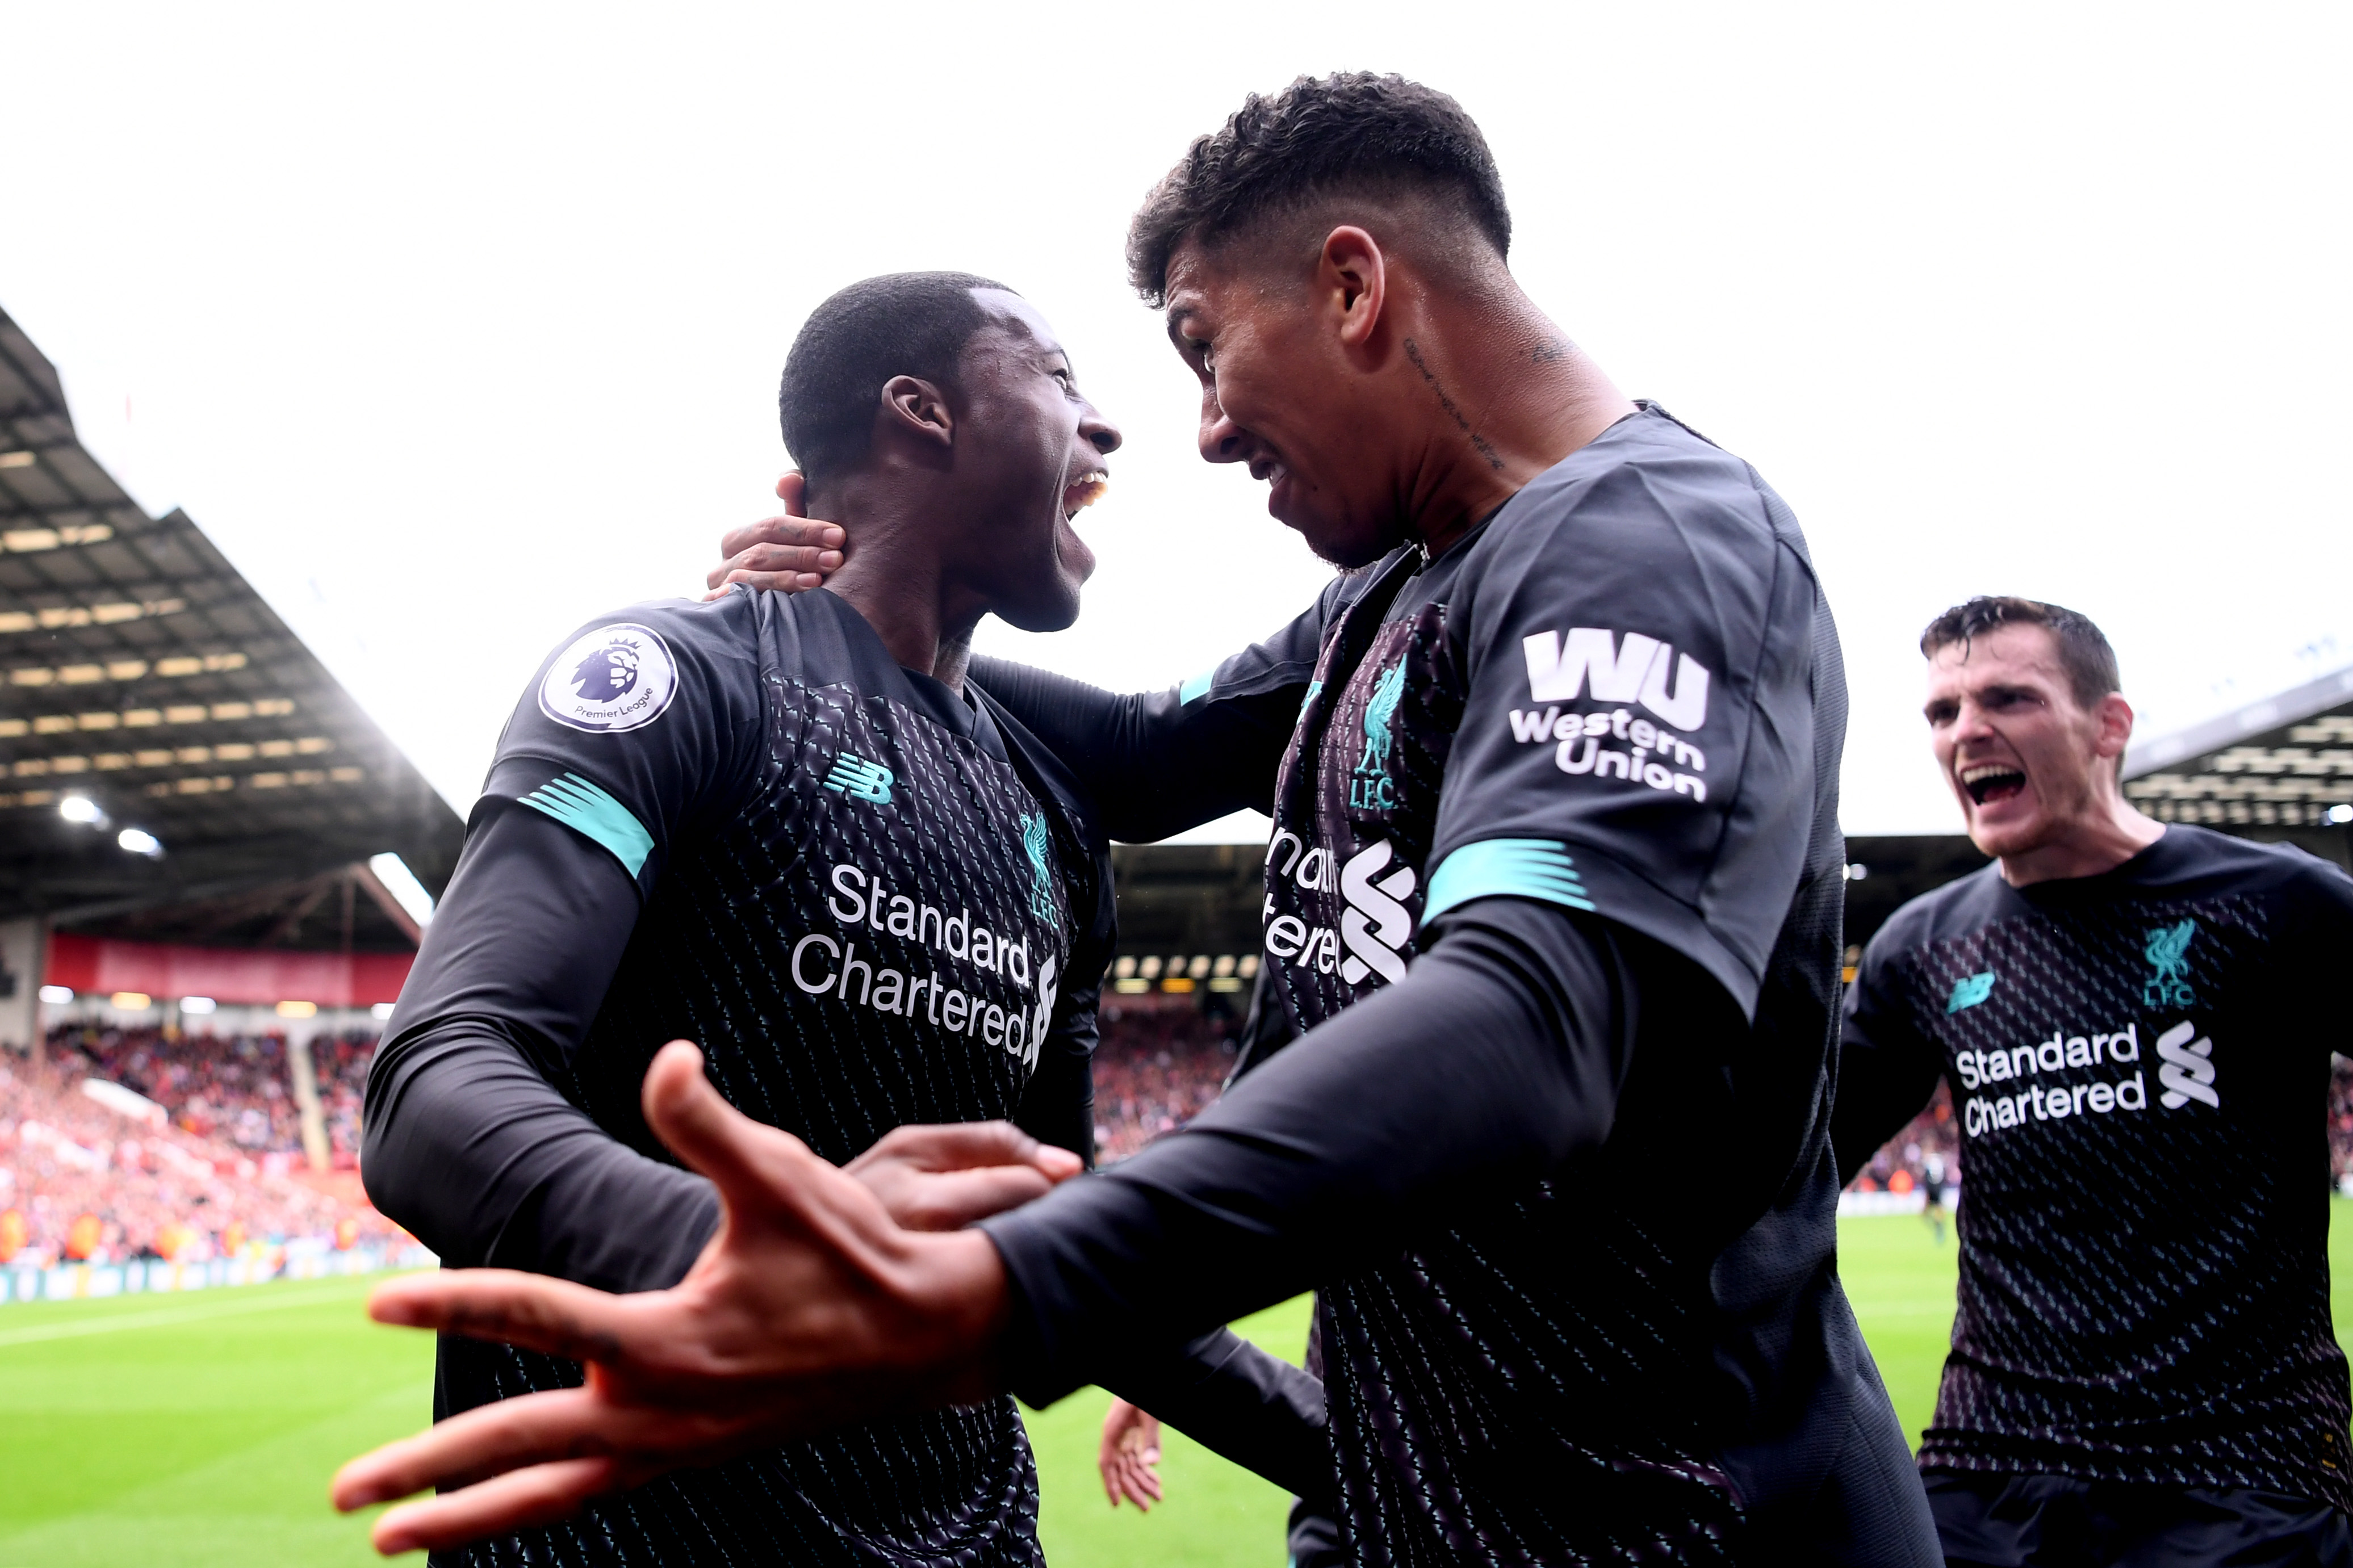 SHEFFIELD, ENGLAND - SEPTEMBER 28:  Georginio Wijnaldum of Liverpool celebrates with teammate Roberto Firmino after scoring his team's first goal during the Premier League match between Sheffield United and Liverpool FC at Bramall Lane on September 28, 2019 in Sheffield, United Kingdom. (Photo by Laurence Griffiths/Getty Images)